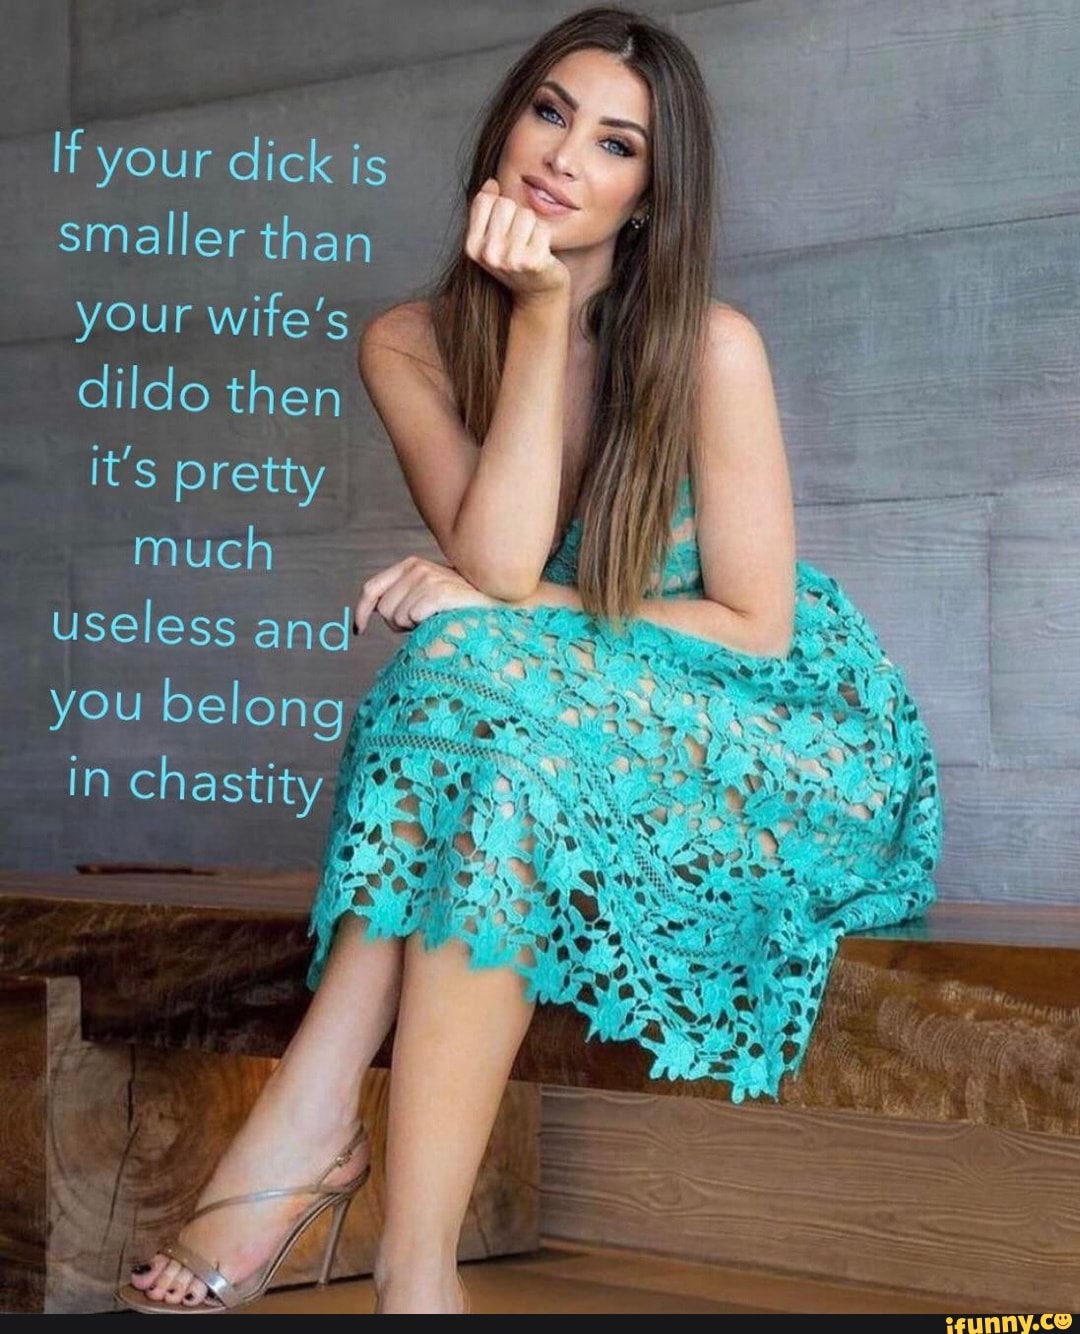 If Your Dick Is Smaller Than Your Wife S Dildo Then It S Pretty Much Useless And You Belong In